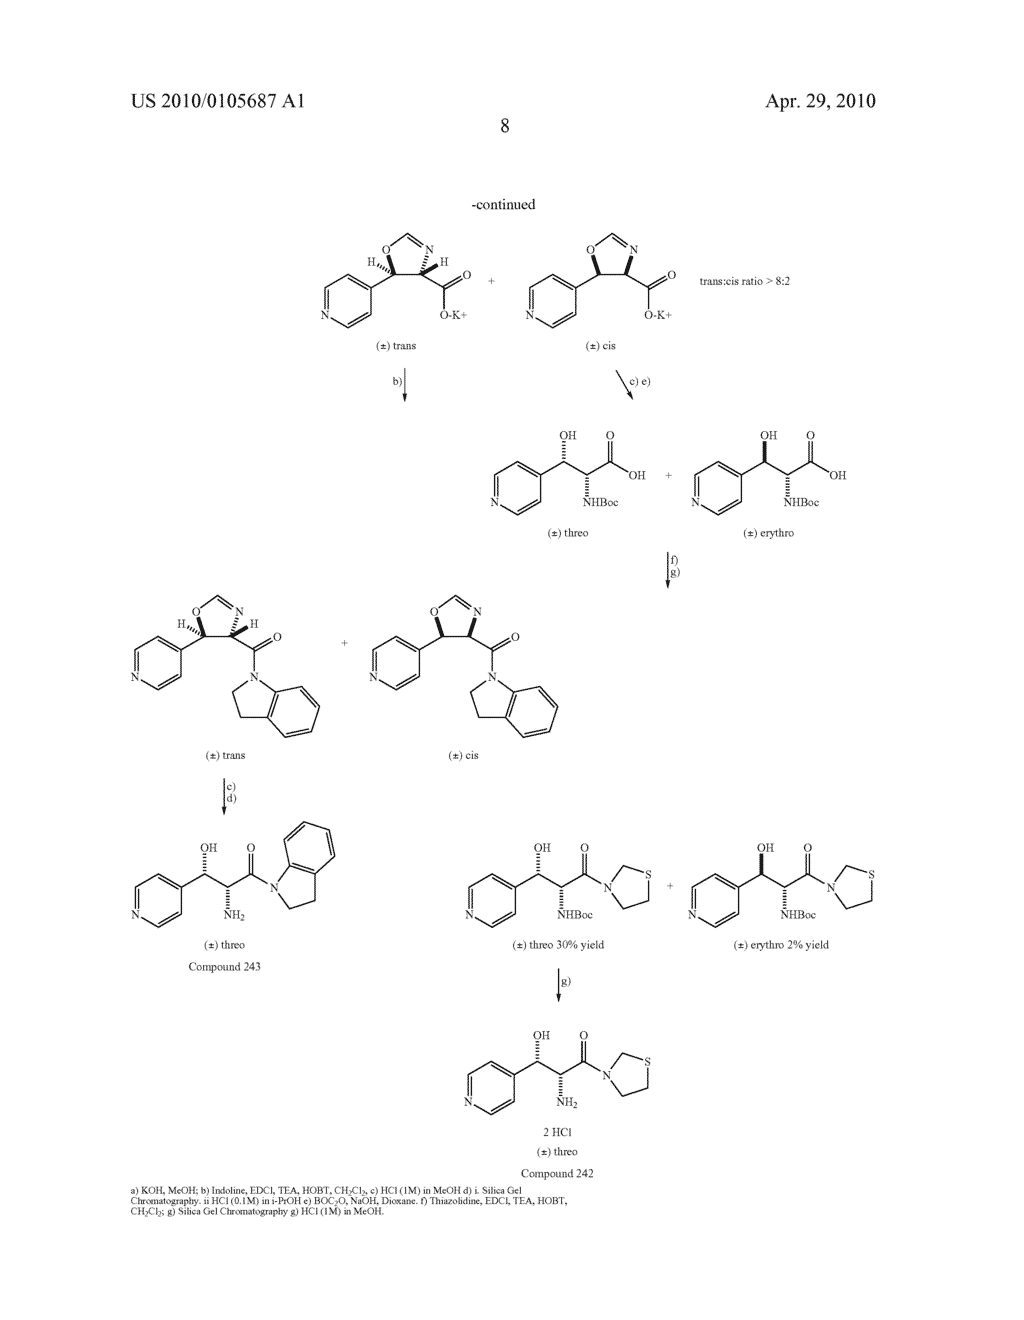 METHODS FOR TREATING COGNITIVE DISORDERS USING 1-ARYL-1-HYDROXY-2,3-DIAMINO-PROPYL AMINES, 1-HETEROARYL-1-HYDROXY-2,3-DIAMINO-PROPYL AMINES AND RELATED COMPOUNDS - diagram, schematic, and image 09